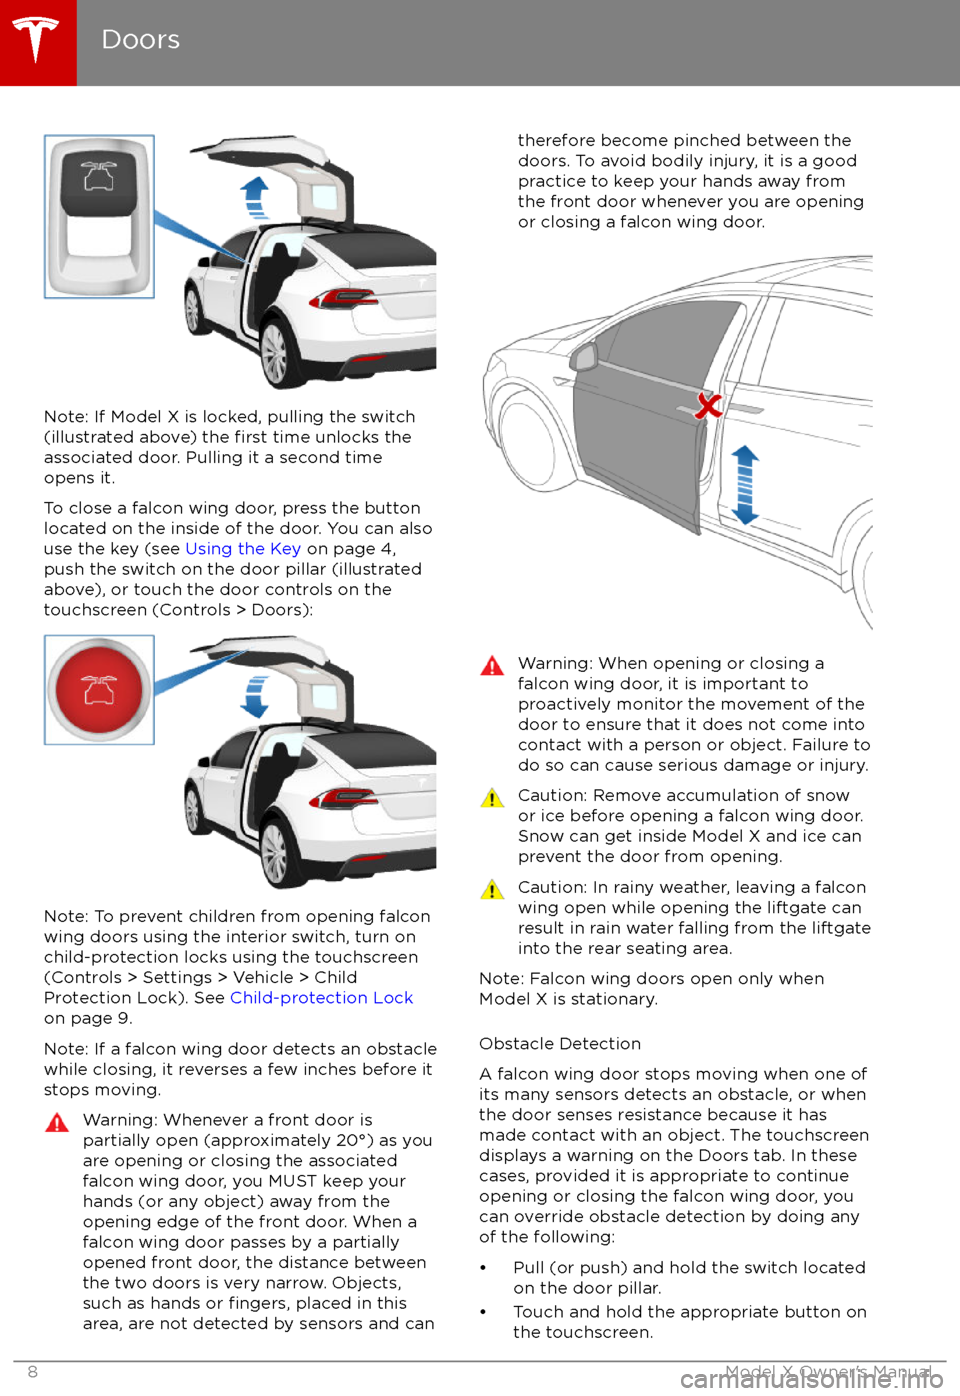 TESLA MODEL X 2017  Owners Manual (UK) Note: If Model X is locked, pulling the switch(illustrated above) the first time unlocks the
associated door. Pulling it a second time
opens it.
To close a falcon wing door, press the button located o